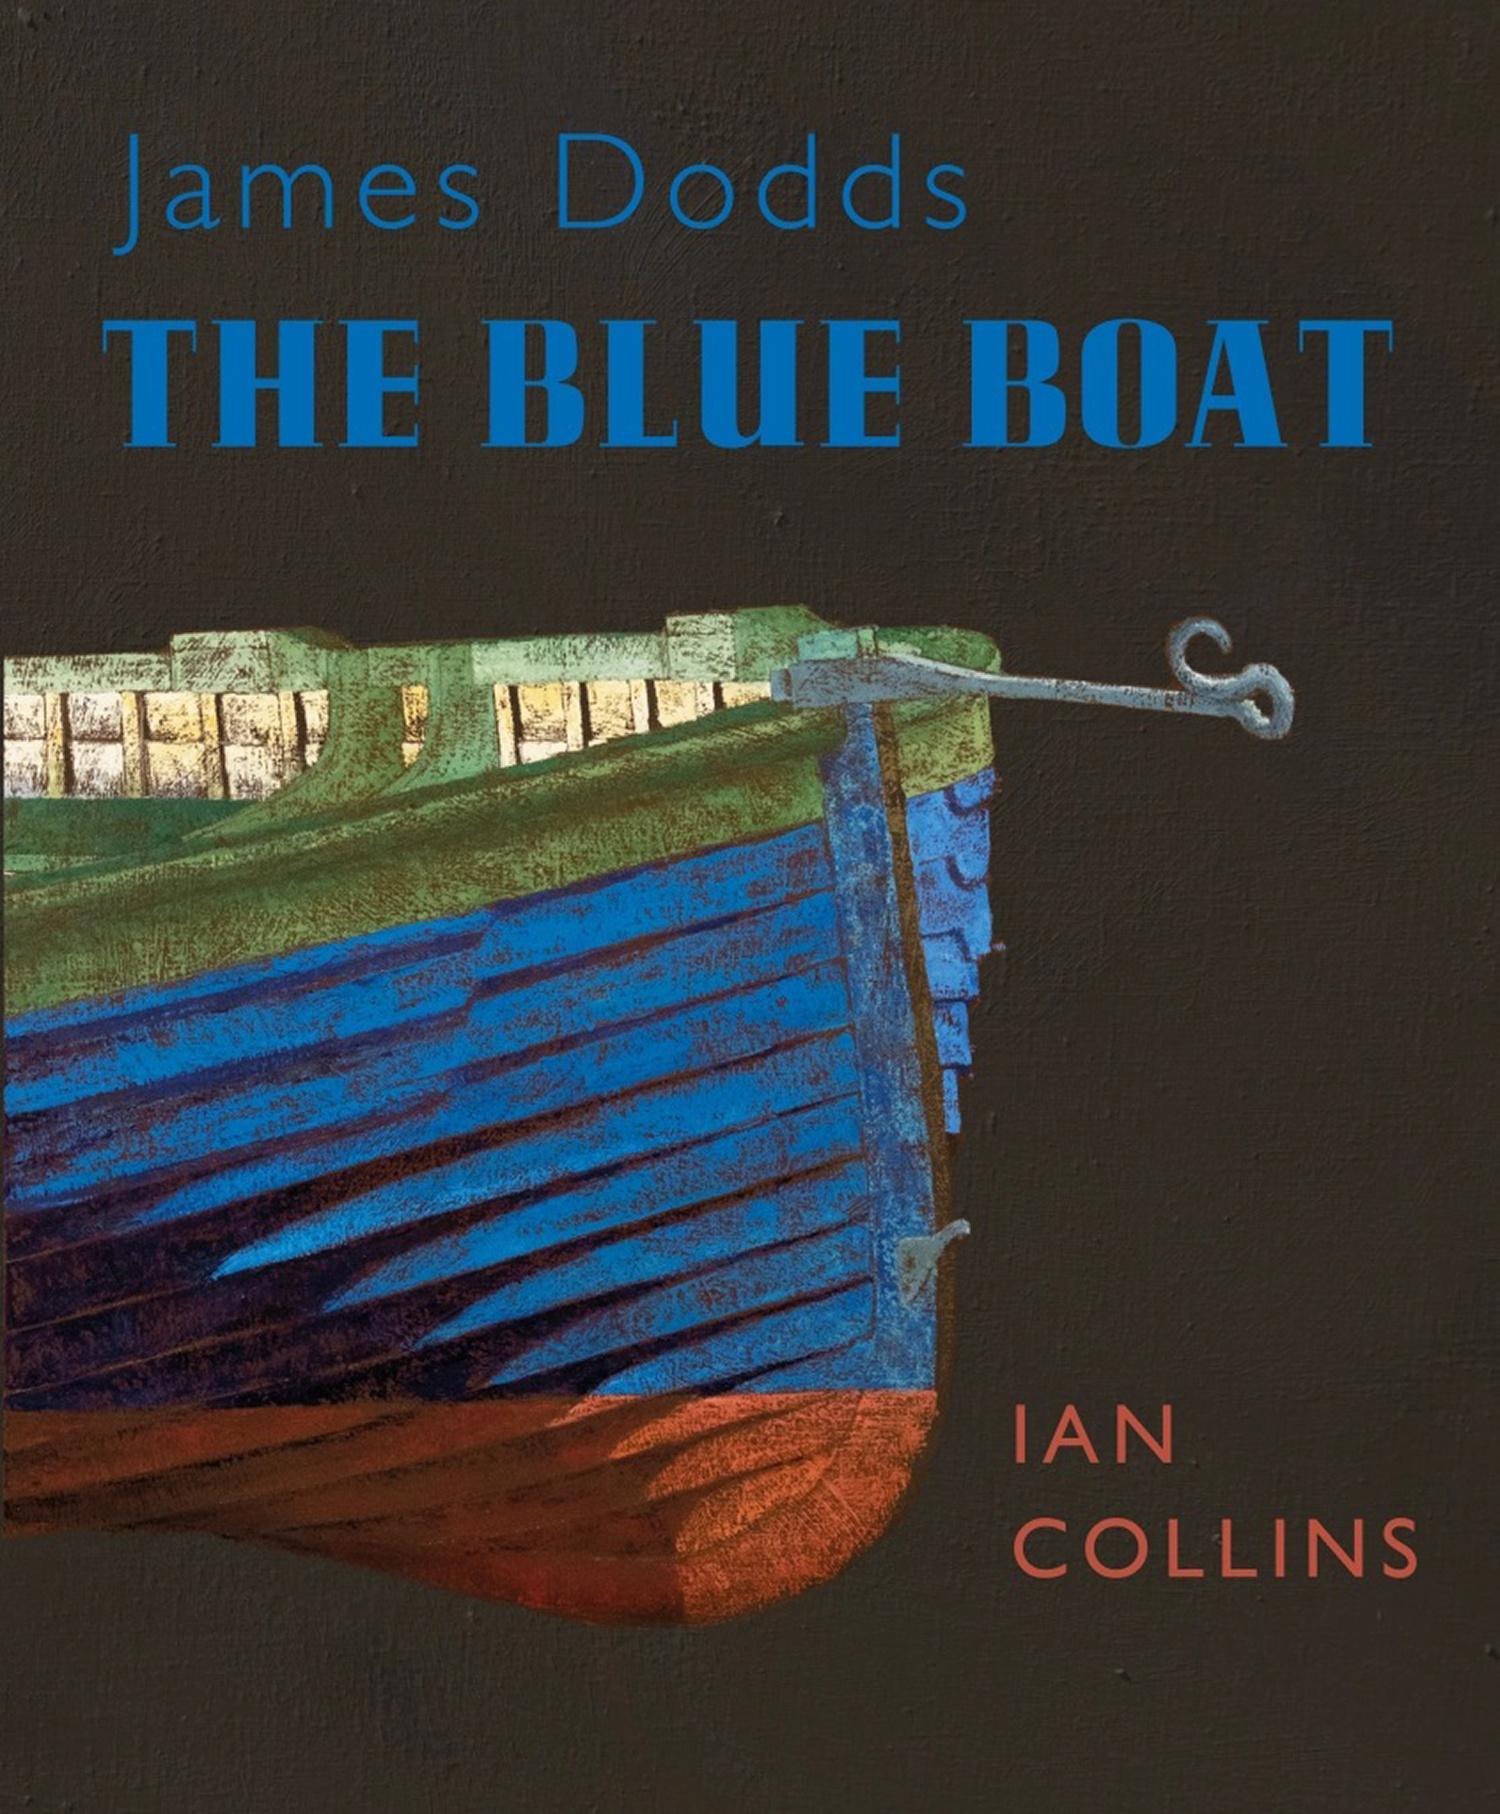 The Blue Boat by James Dodds